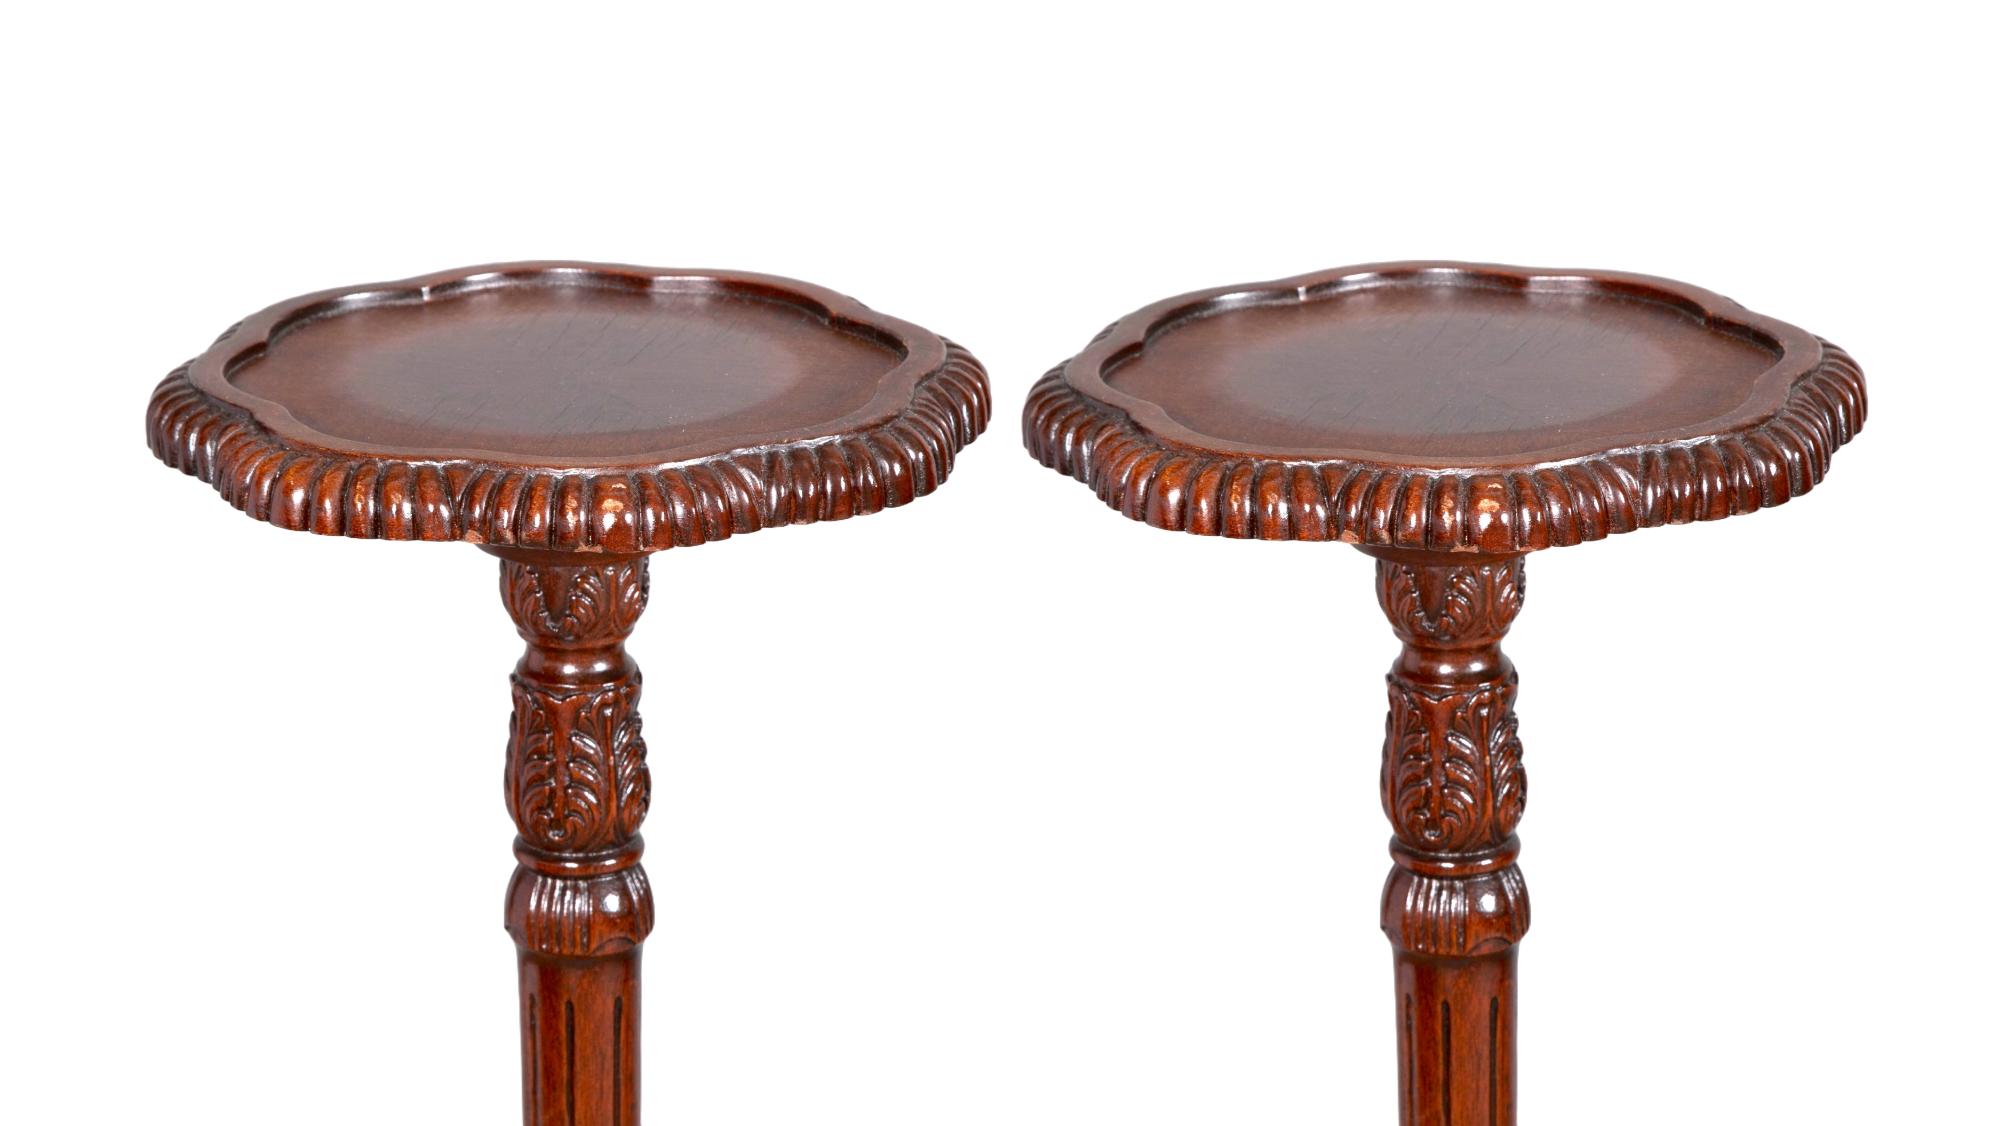 Immerse your space in the timeless elegance of the early 19th Century with this exquisite pair of English Chippendale Style Mahogany Wood Tripod Foot Candle Stands / pedestals. Each stand is a masterpiece of craftsmanship, featuring a hand-carved